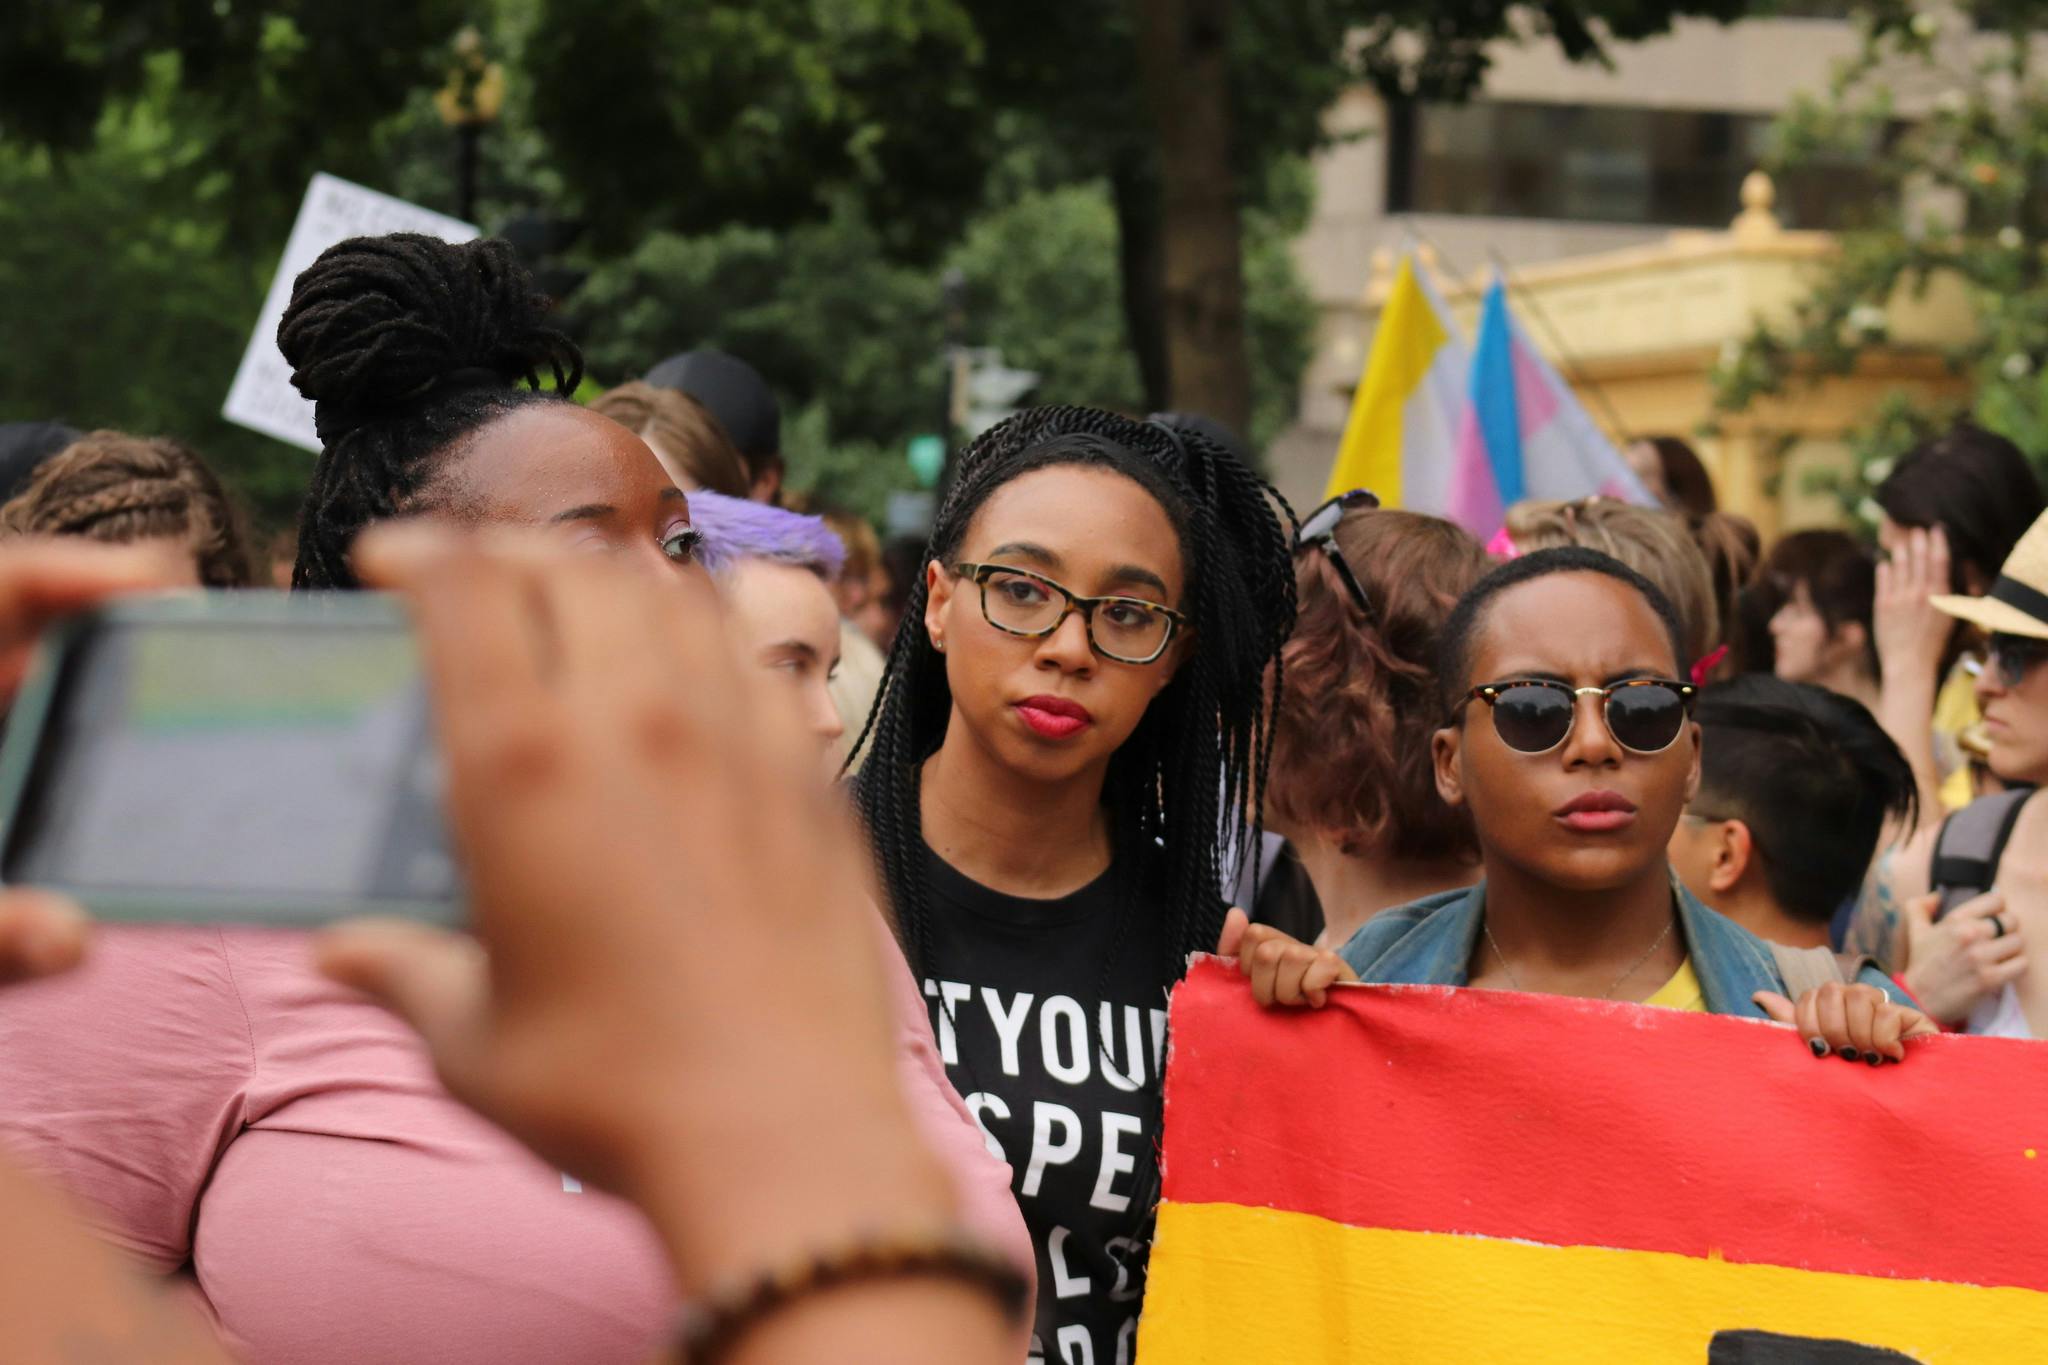 A group of Black queer people marching during an LGBTQ event. Public sex is an important part of the queer community's legacy.